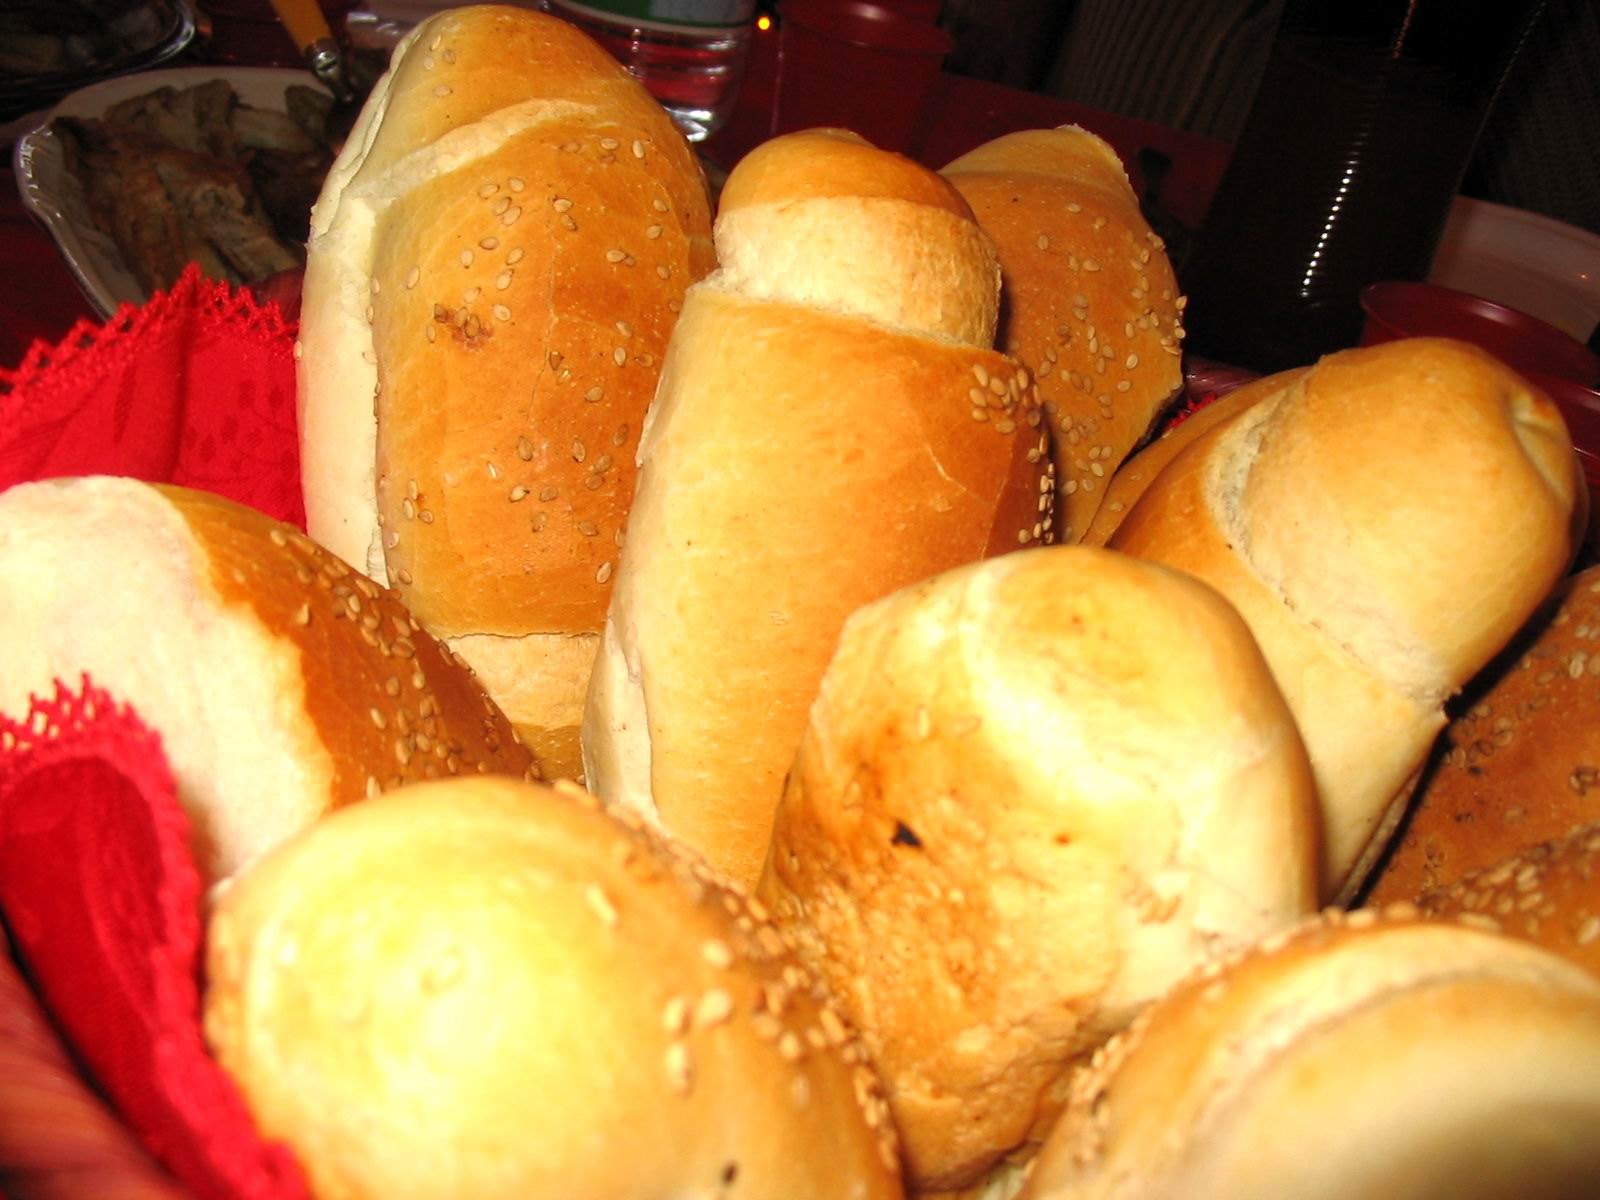 bread rolls piled up in a red basket